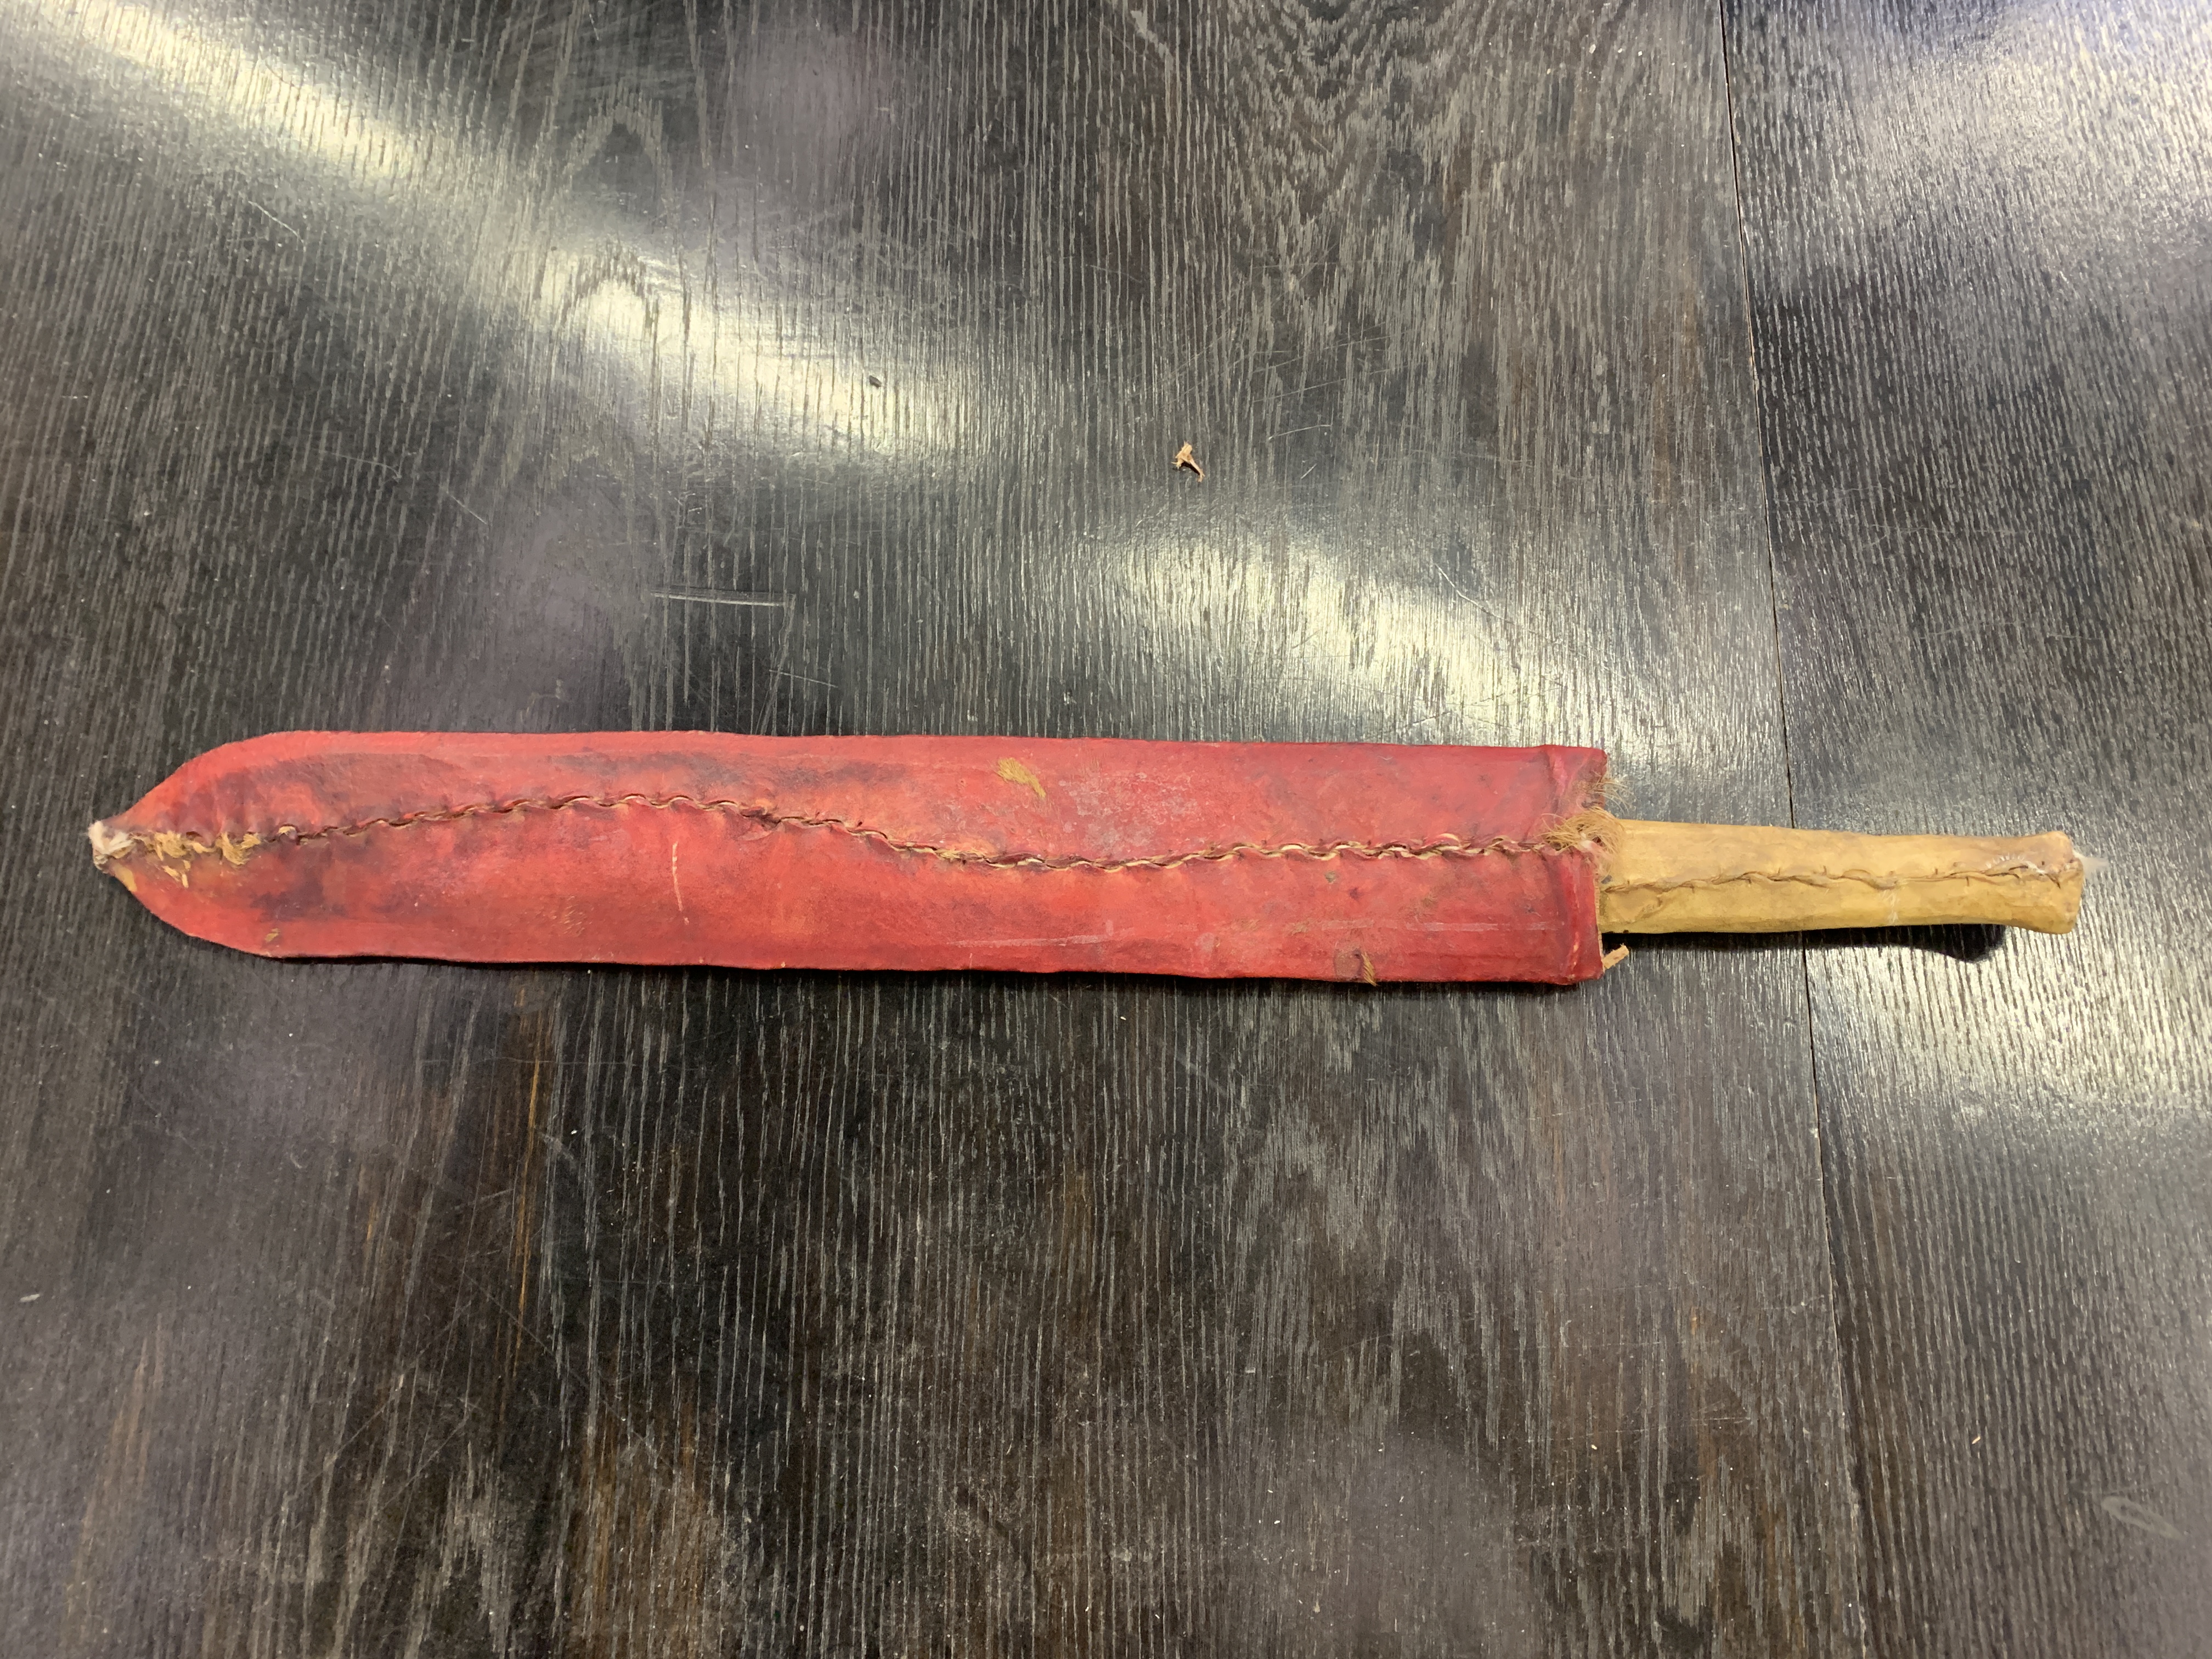 Hand forged African machete - Image 2 of 2